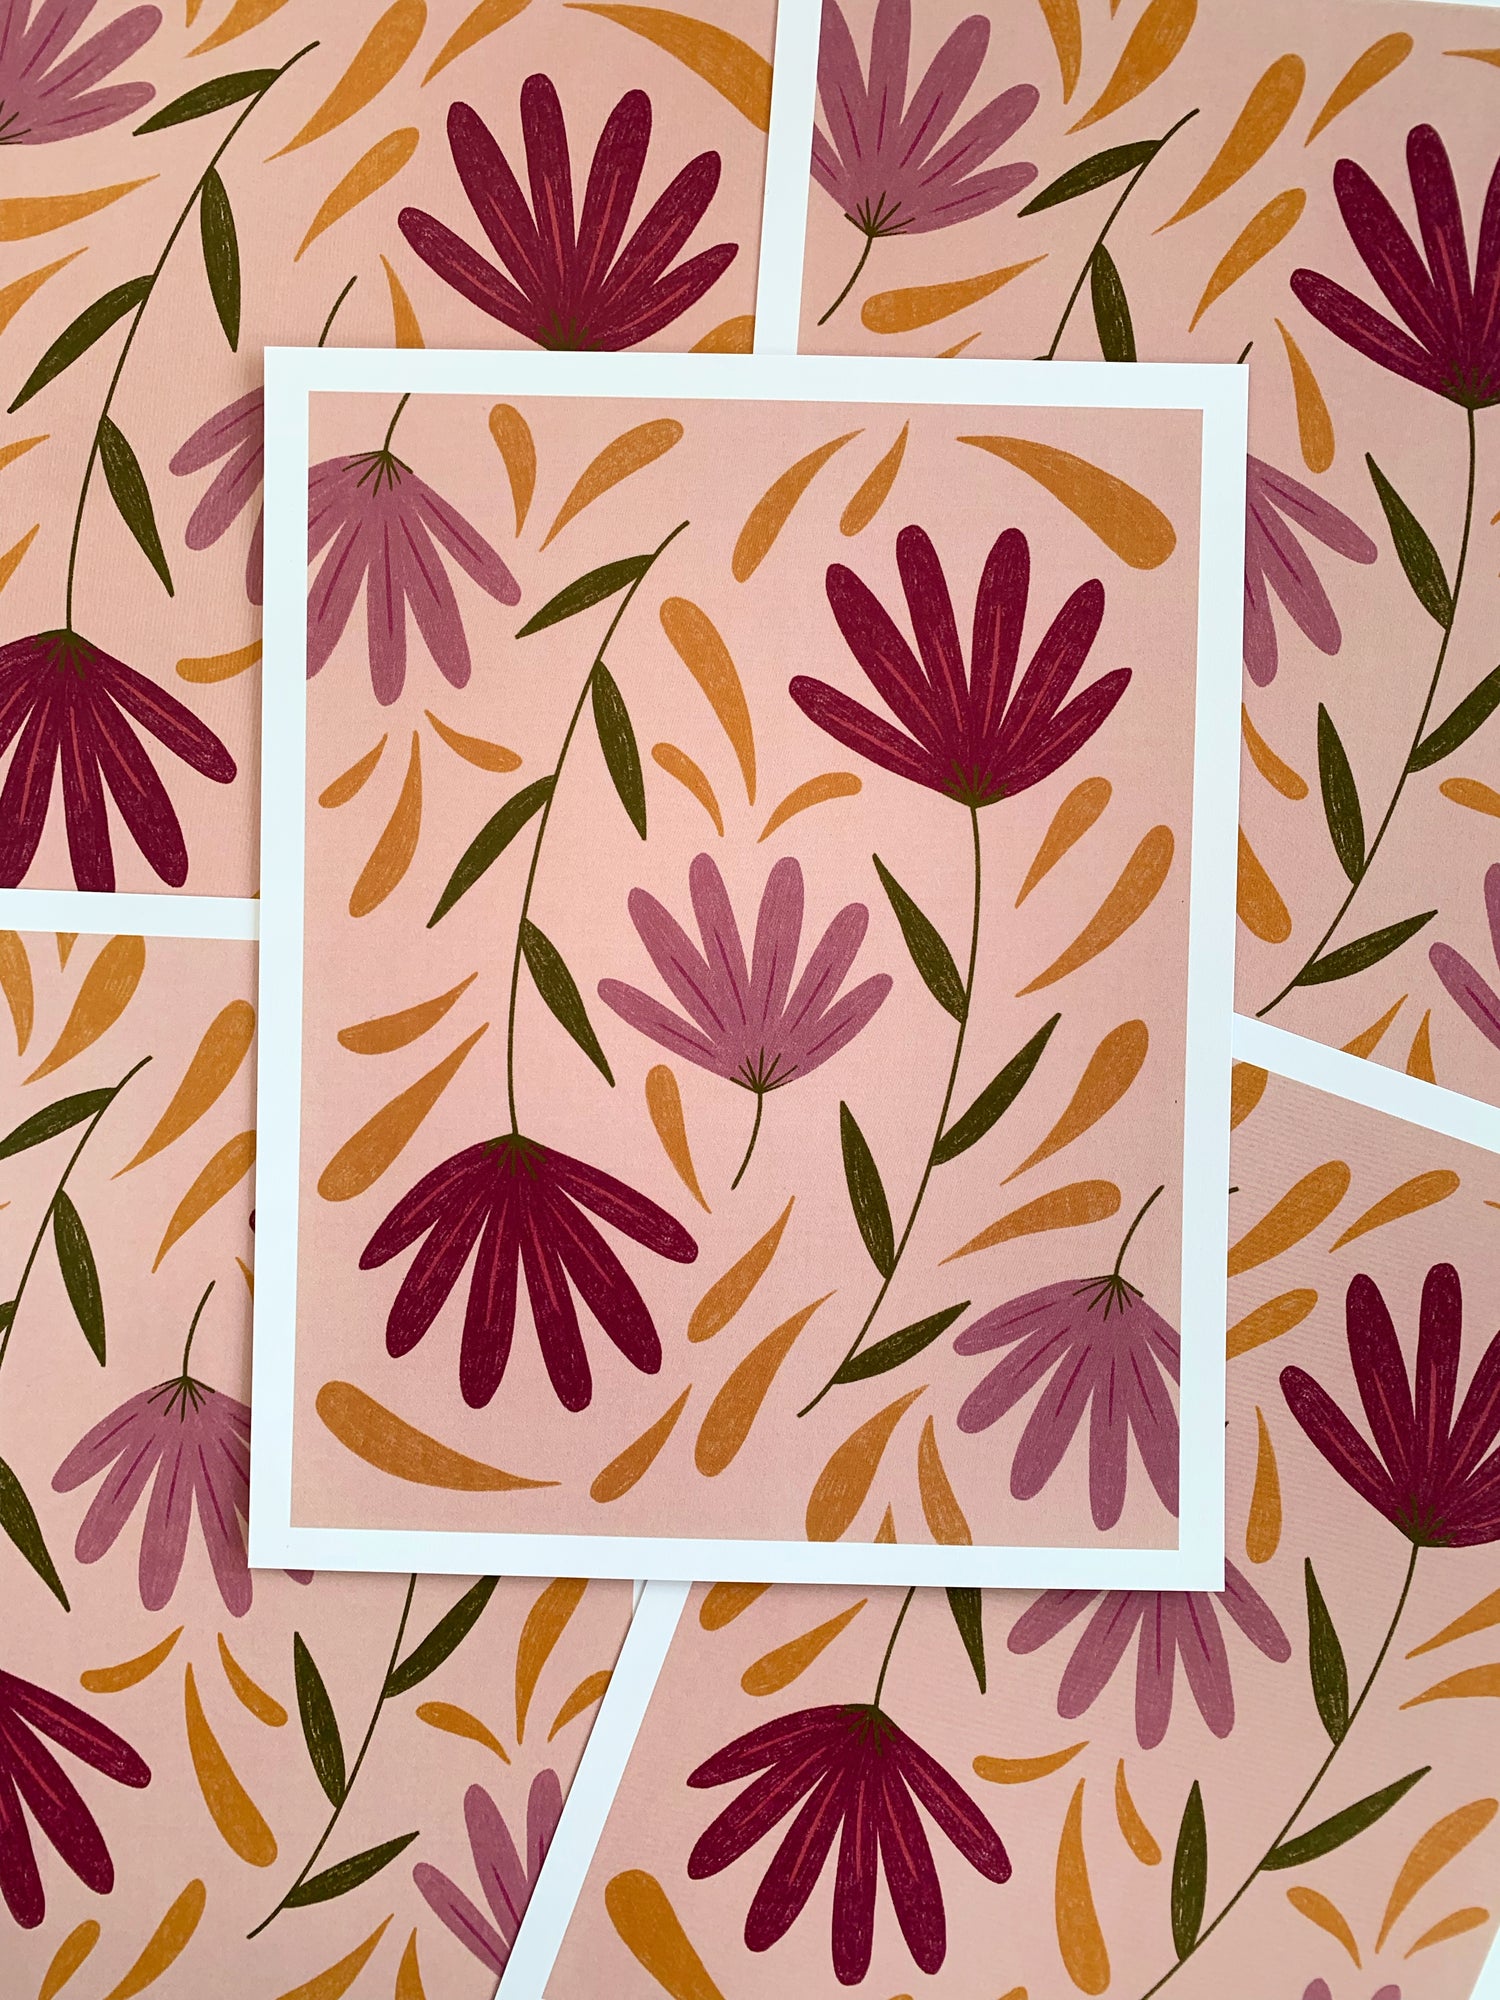 Spread of colorful flowers on pink background art prints